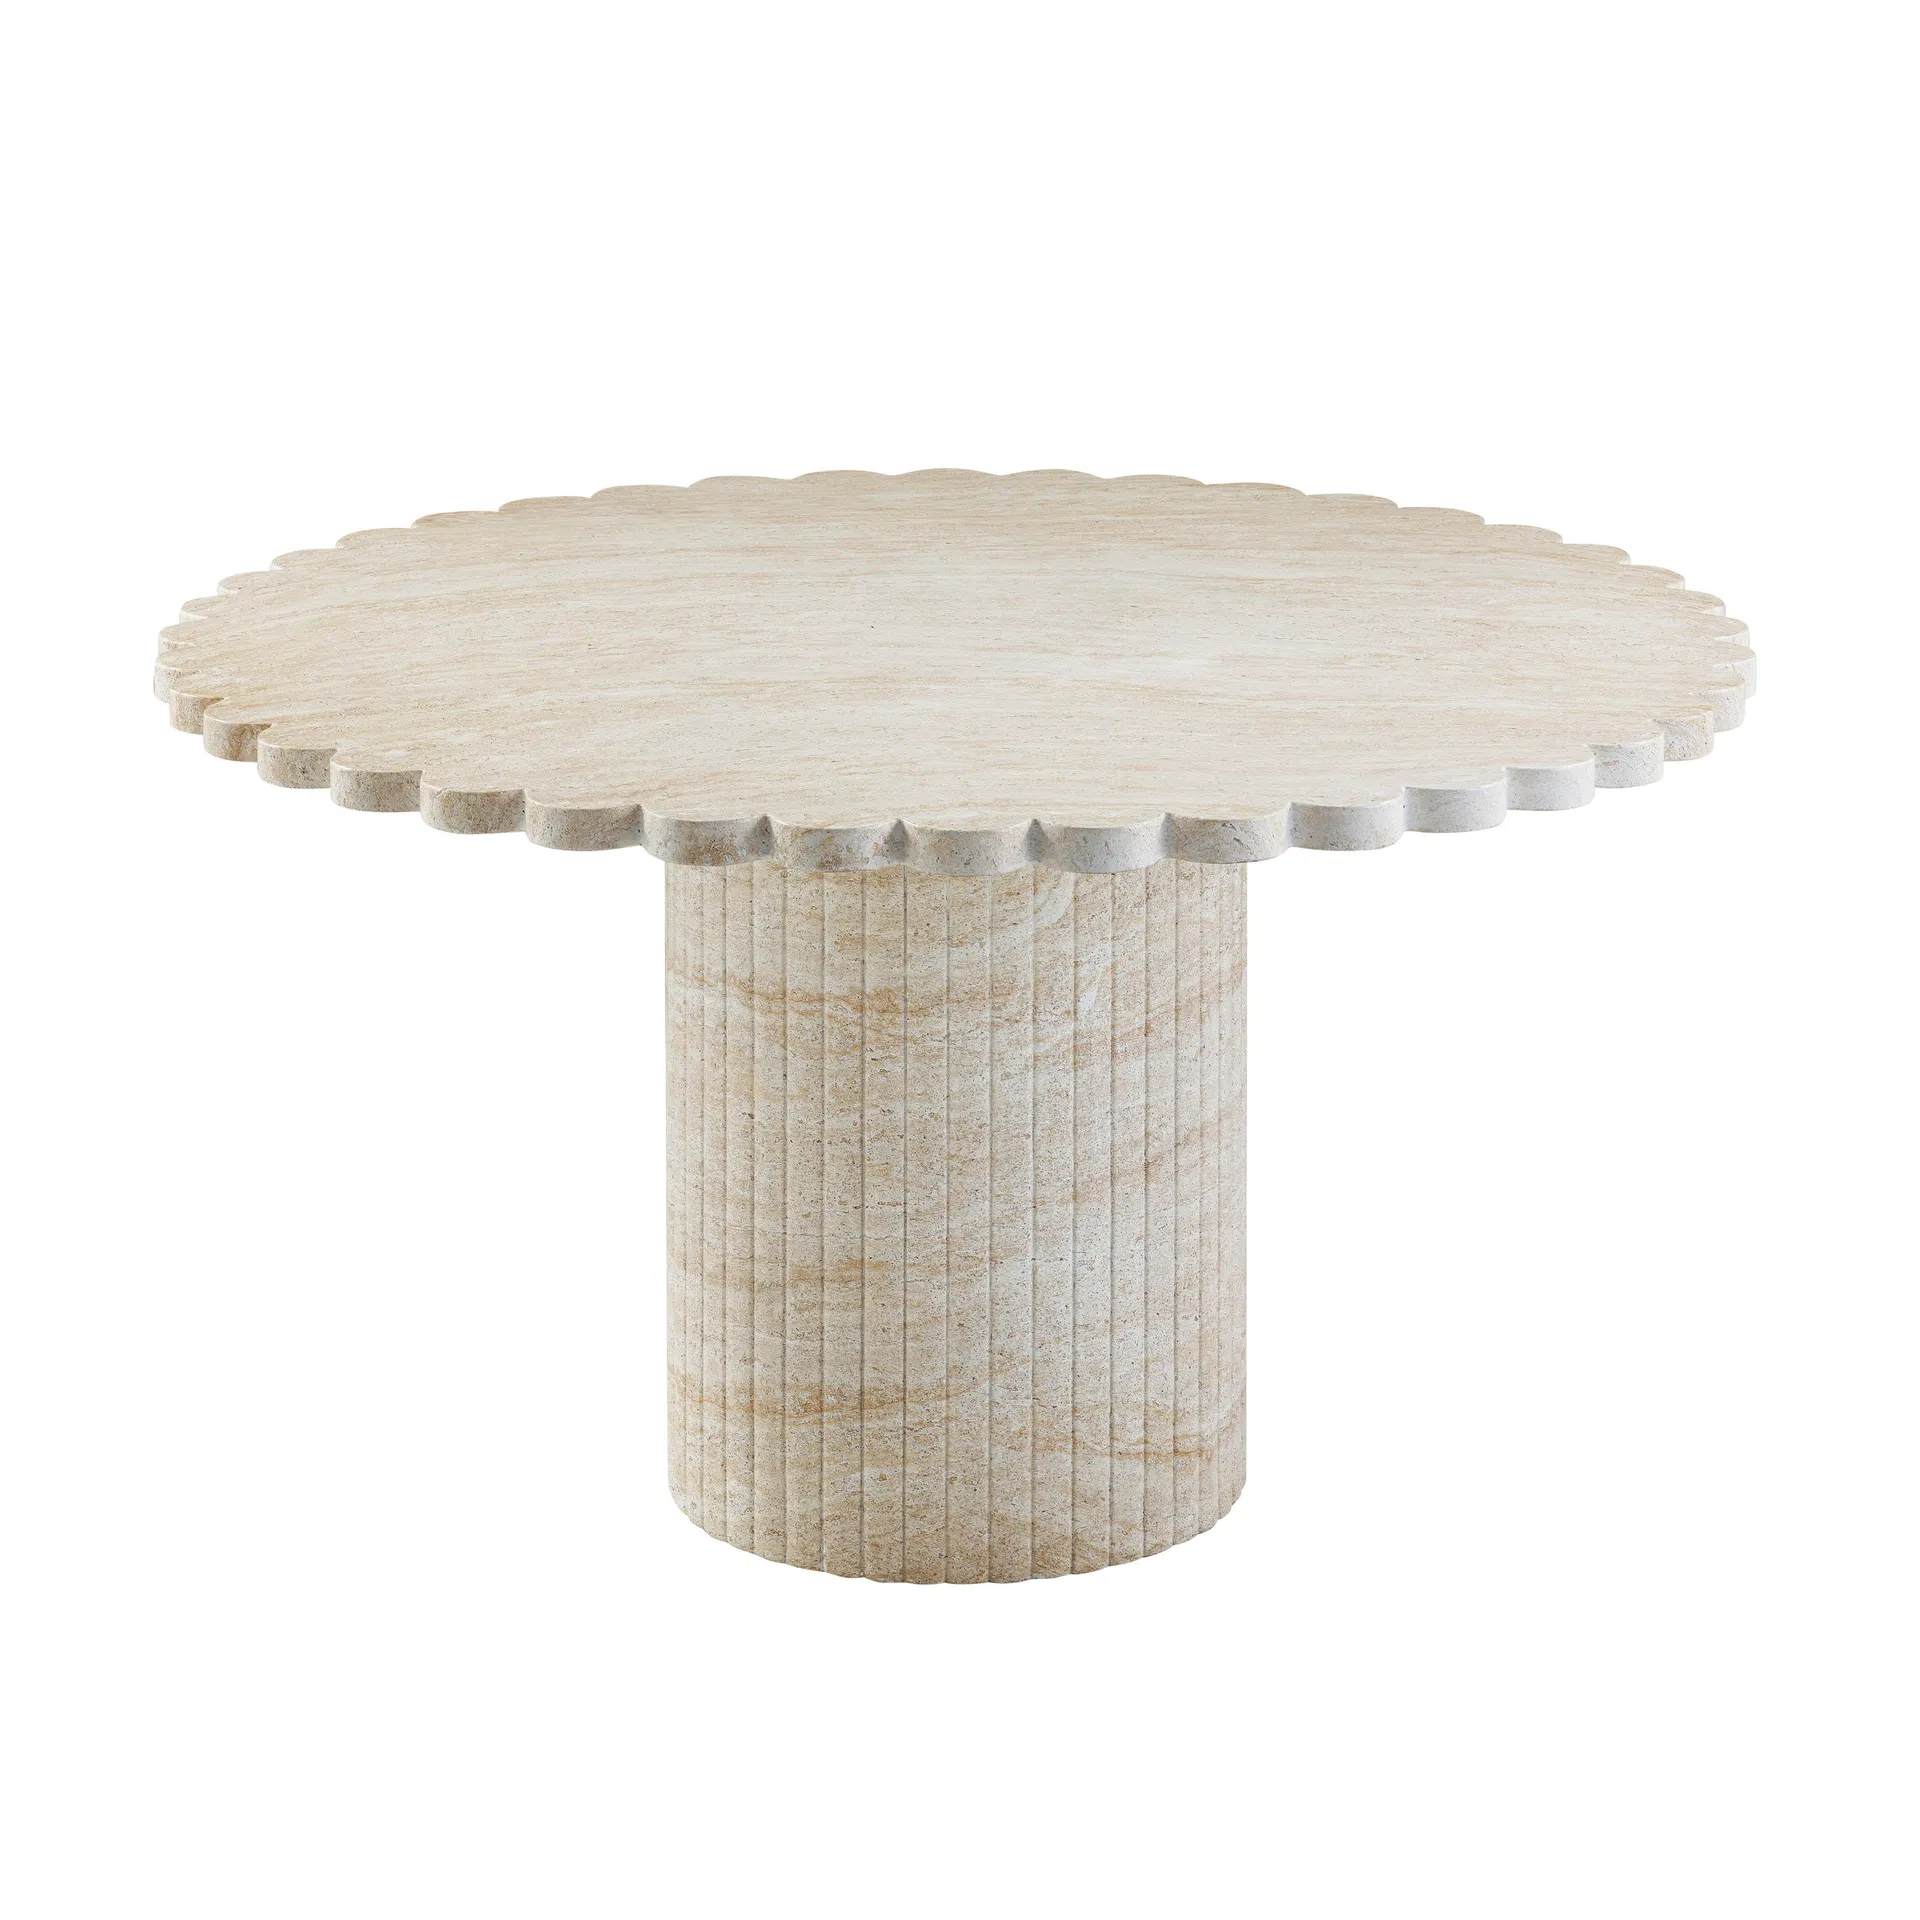 Blossom Washed Travertine Finish Indoor / Outdoor 54" Round Dining Table